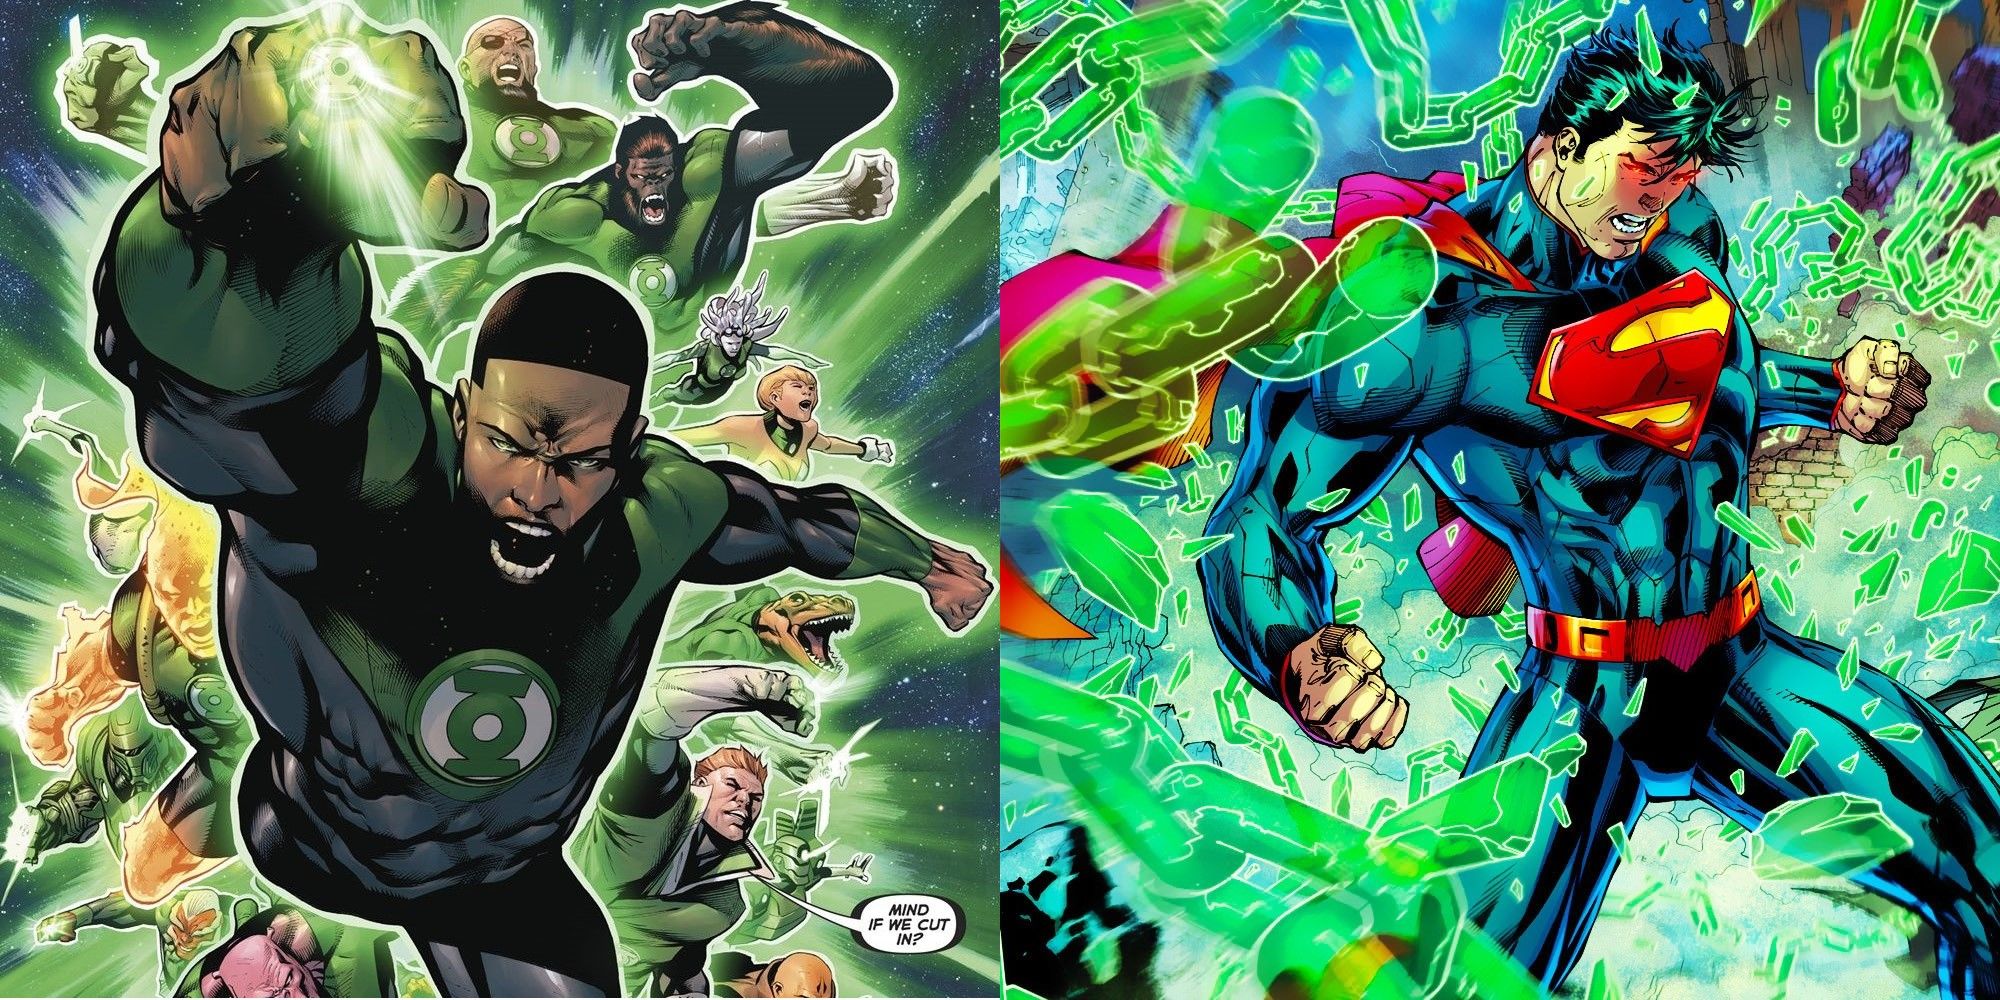 Green Lantern created Kryptonite from scratch to use it against Superman